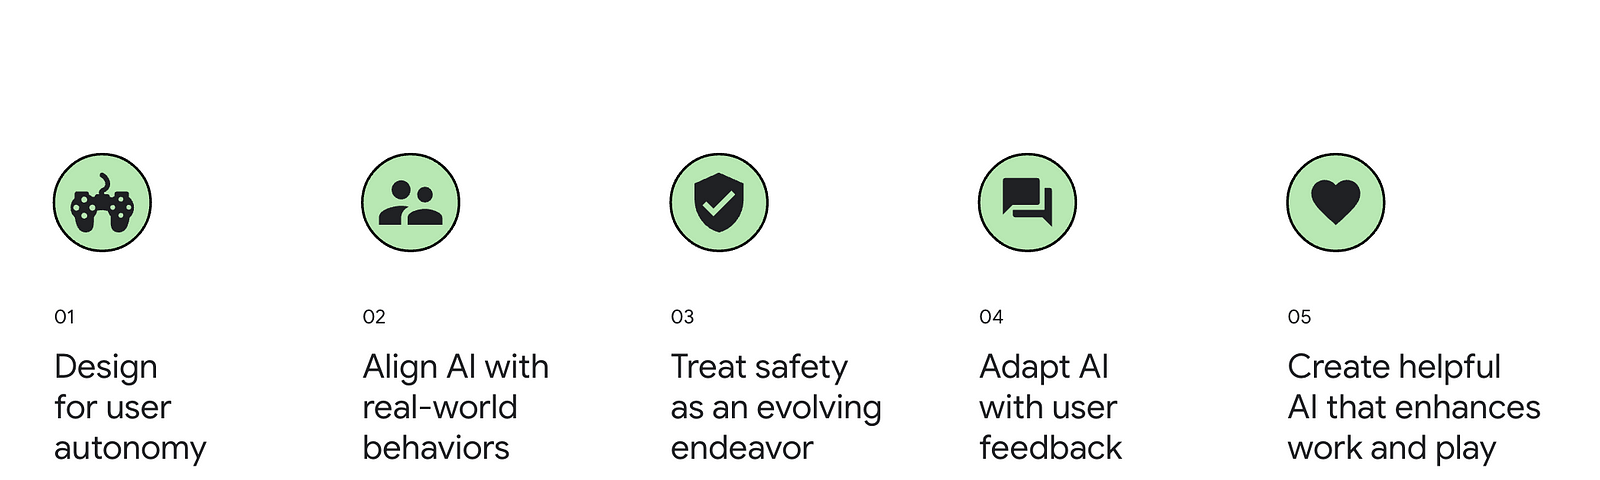 A diagram of five principles with a green and black image above each principle. Principle 1: An image of a game console, “Design for user autonomy”. Principle 2: An outline of 2 people, “Align AI with real-world behaviors”. Principle 3: A shield with a check mark, “Treat safety as an evolving endeavor”. Principle 4: Messaging icons, “Adapt AI with user feedback”. Principle 5: A heart shape, “Create helpful AI that enhances work and play”